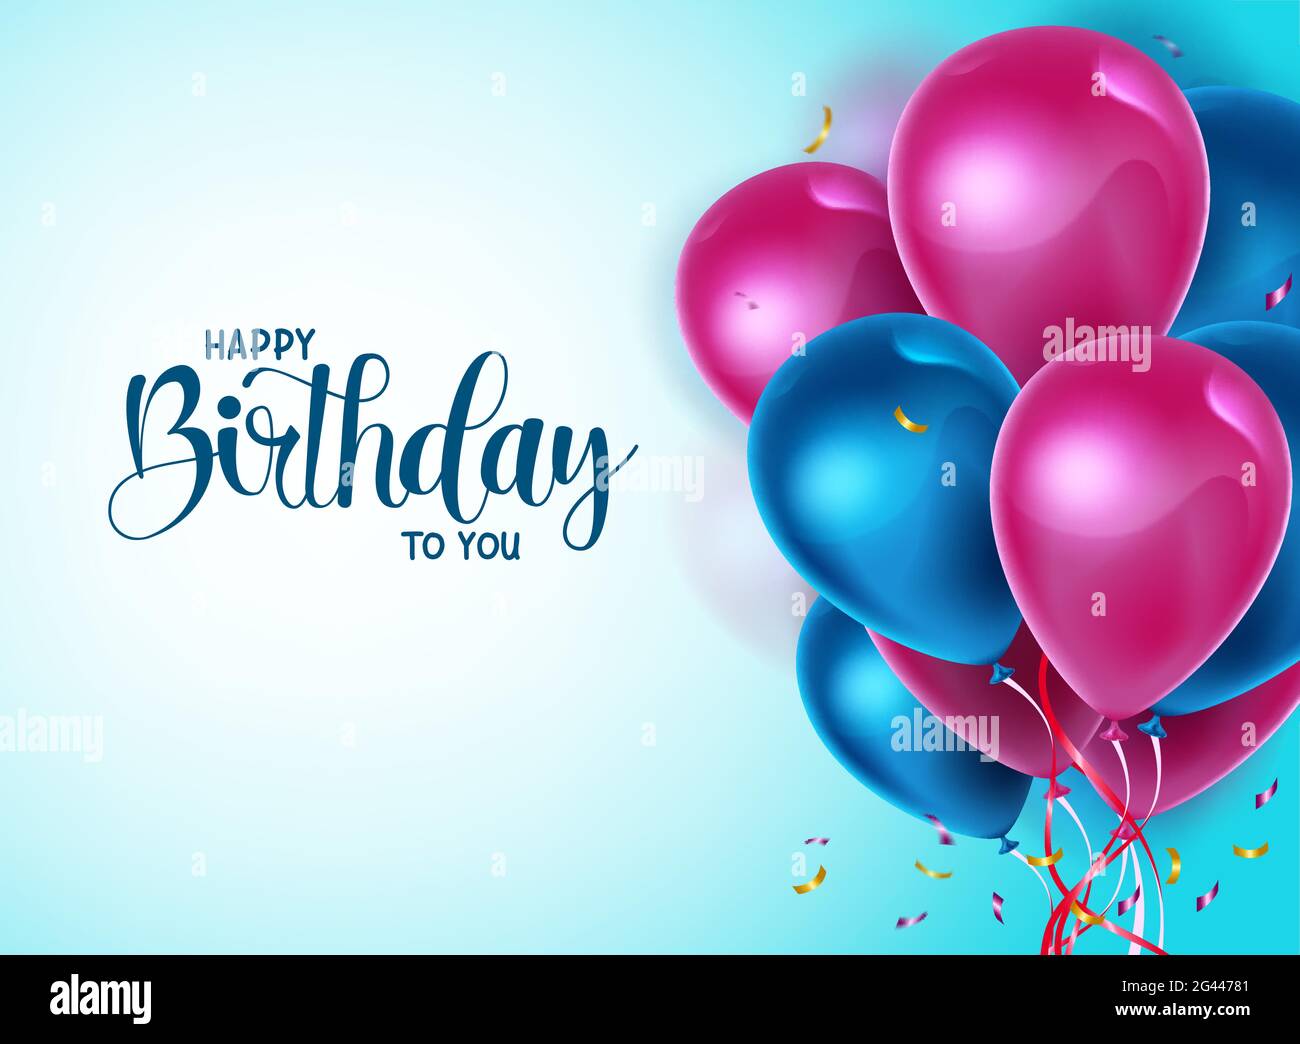 Happy birthday balloons vector banner template. Happy birthday to you greeting text with balloons and confetti decoration element for birth day card. Stock Vector